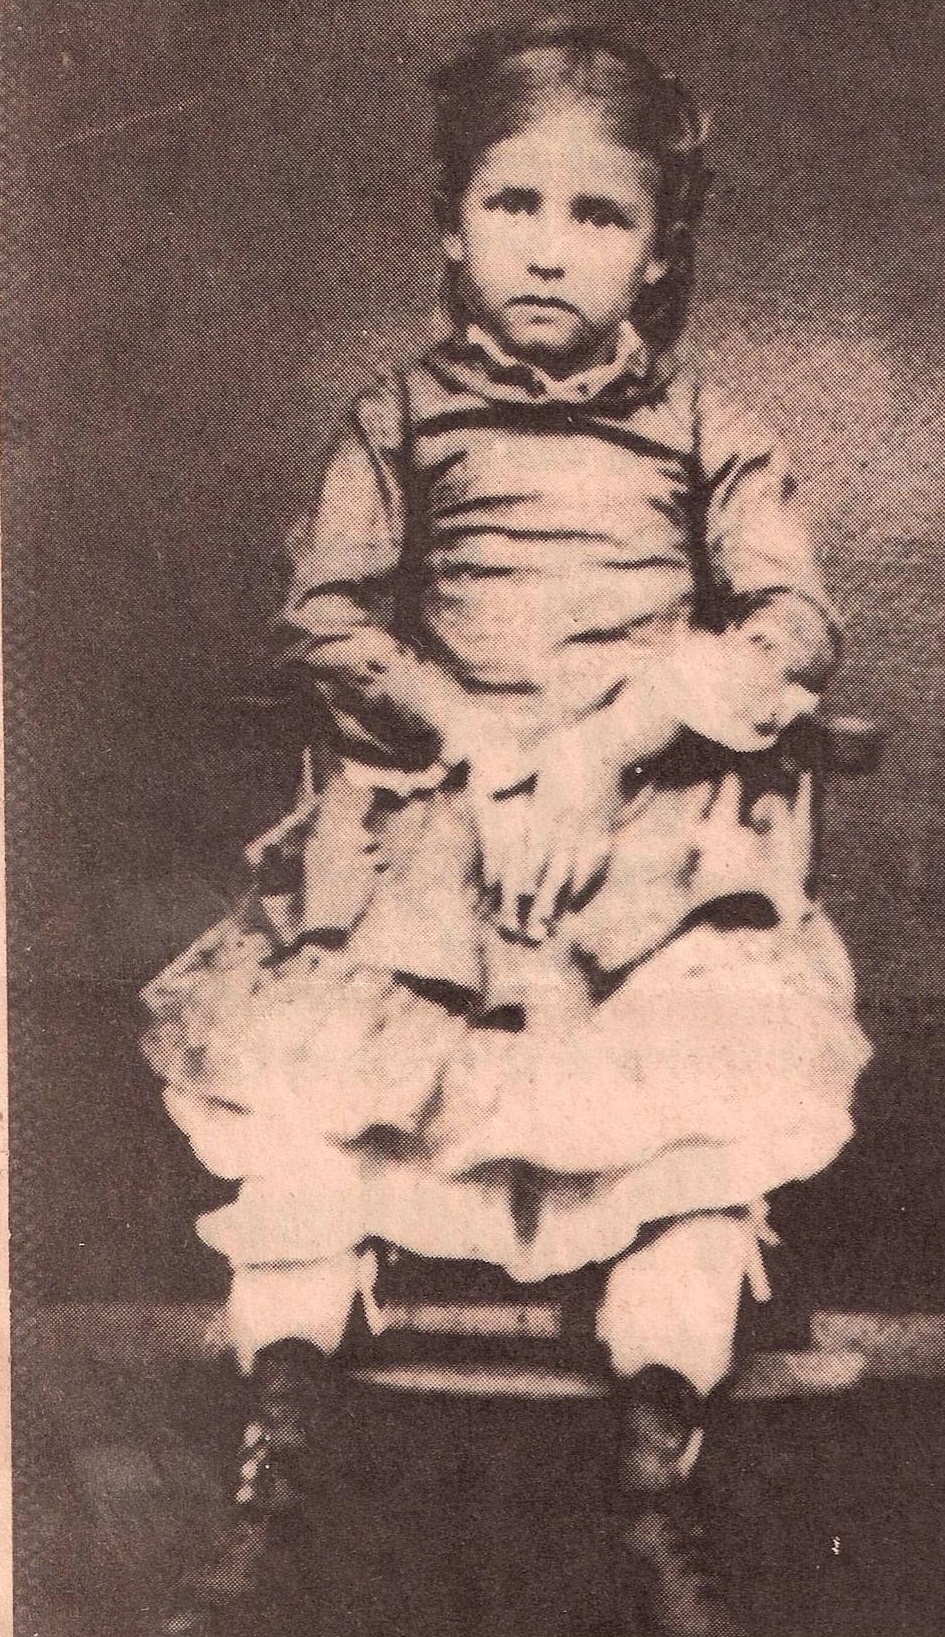 In 1881, aged 6. (Source: unknown newspaper / The 110 Club)